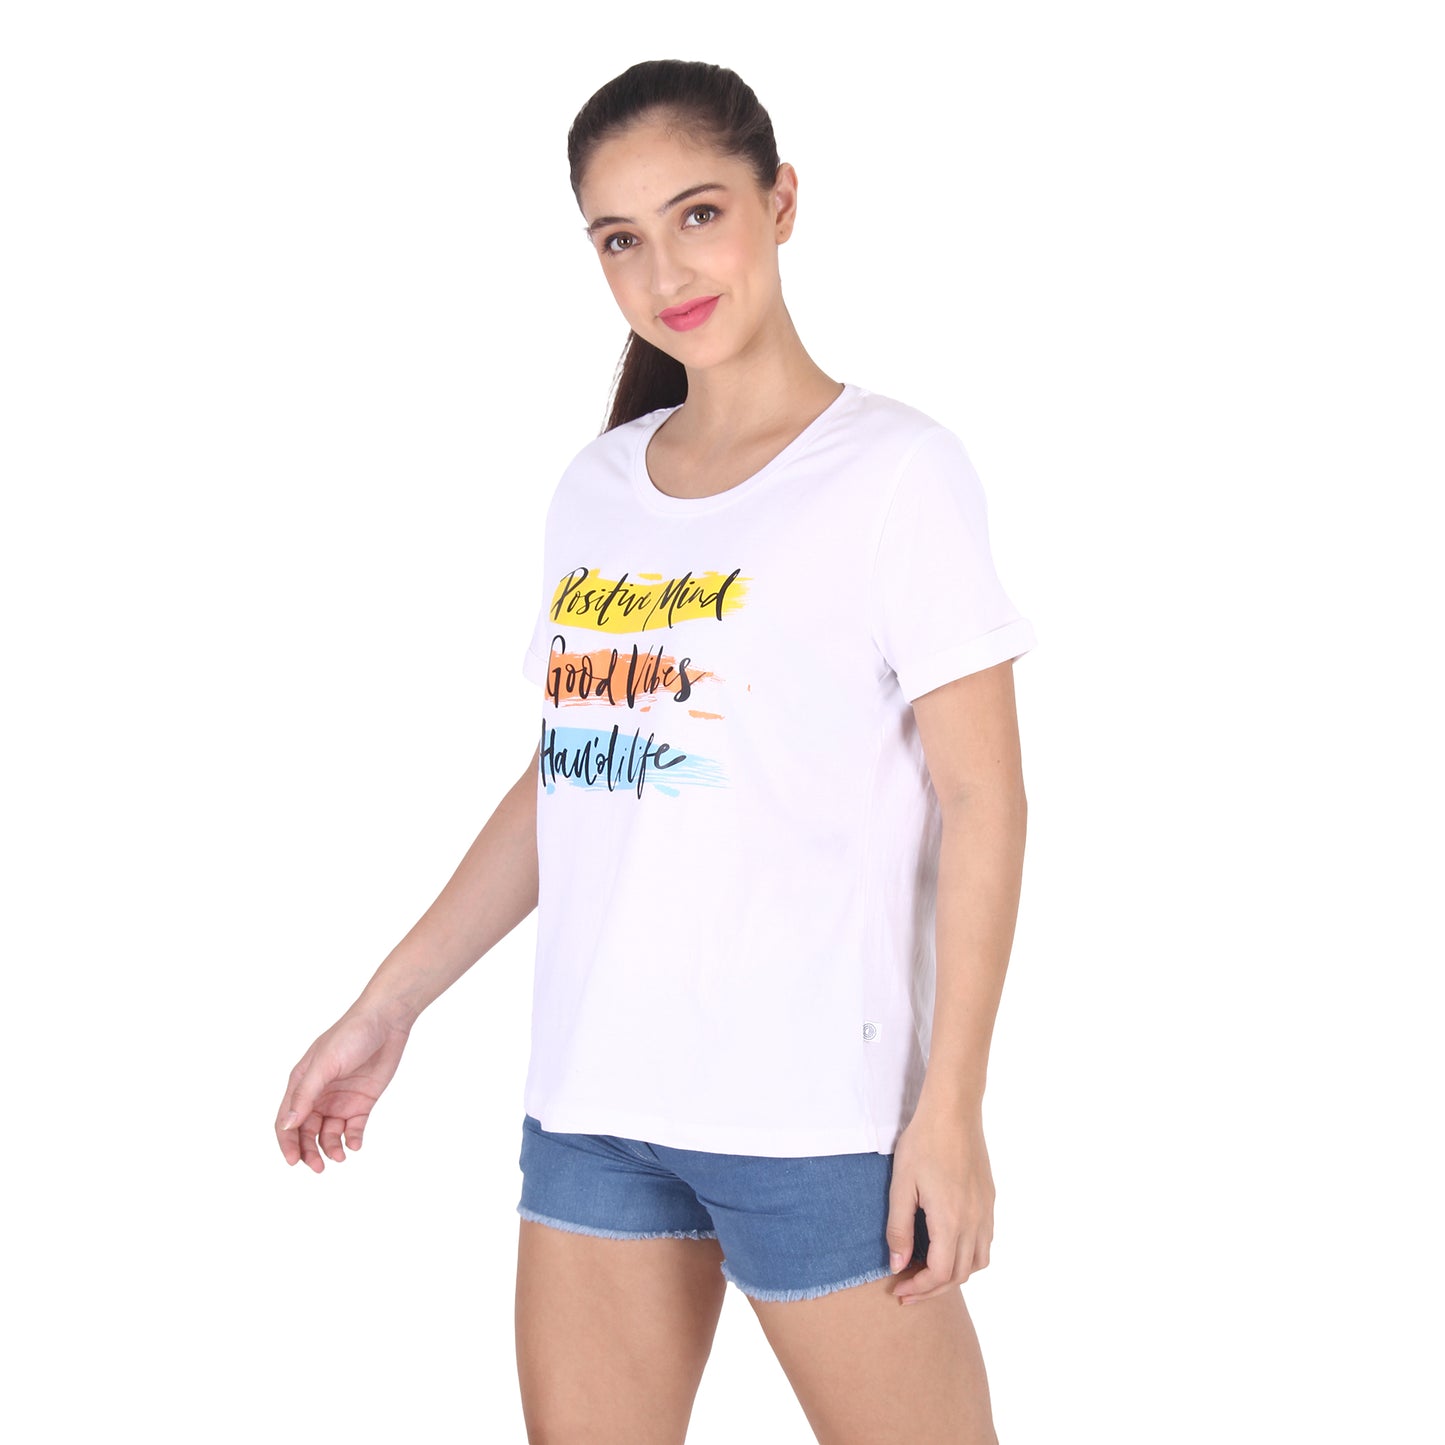 POSITIVE MIND | PRINTED T-SHIRTS FOR WOMEN | WOMEN T-SHIRTS